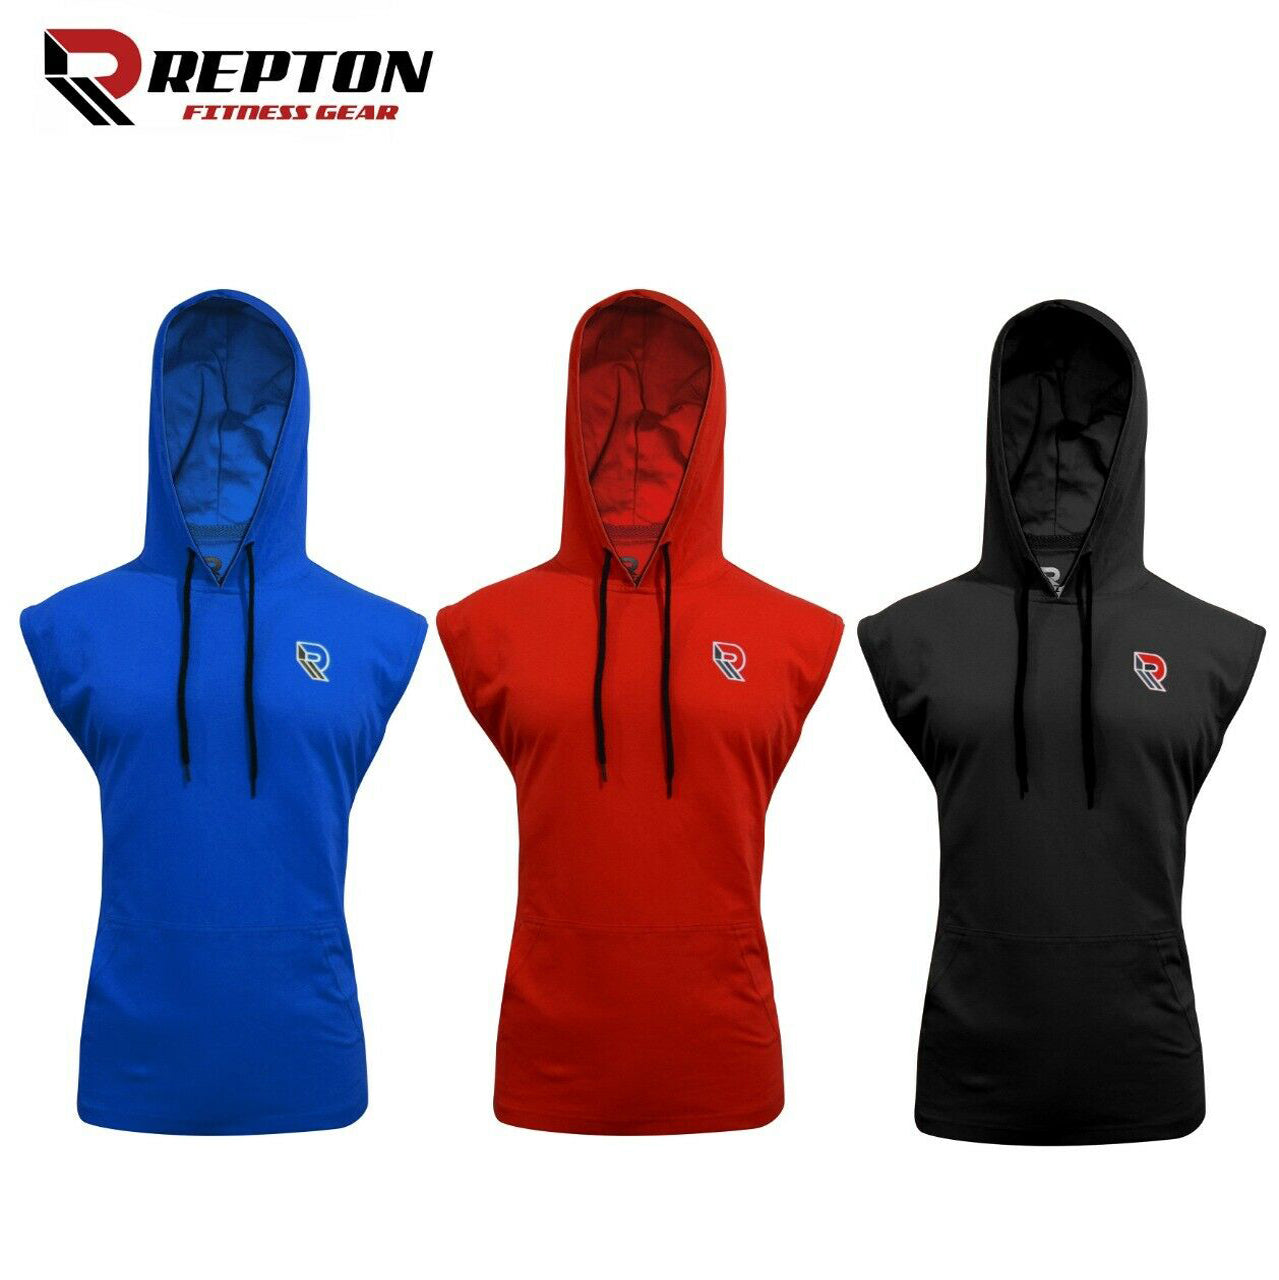 Repton Hooded Vest Gym Muscle Sleeveless Tank Tops